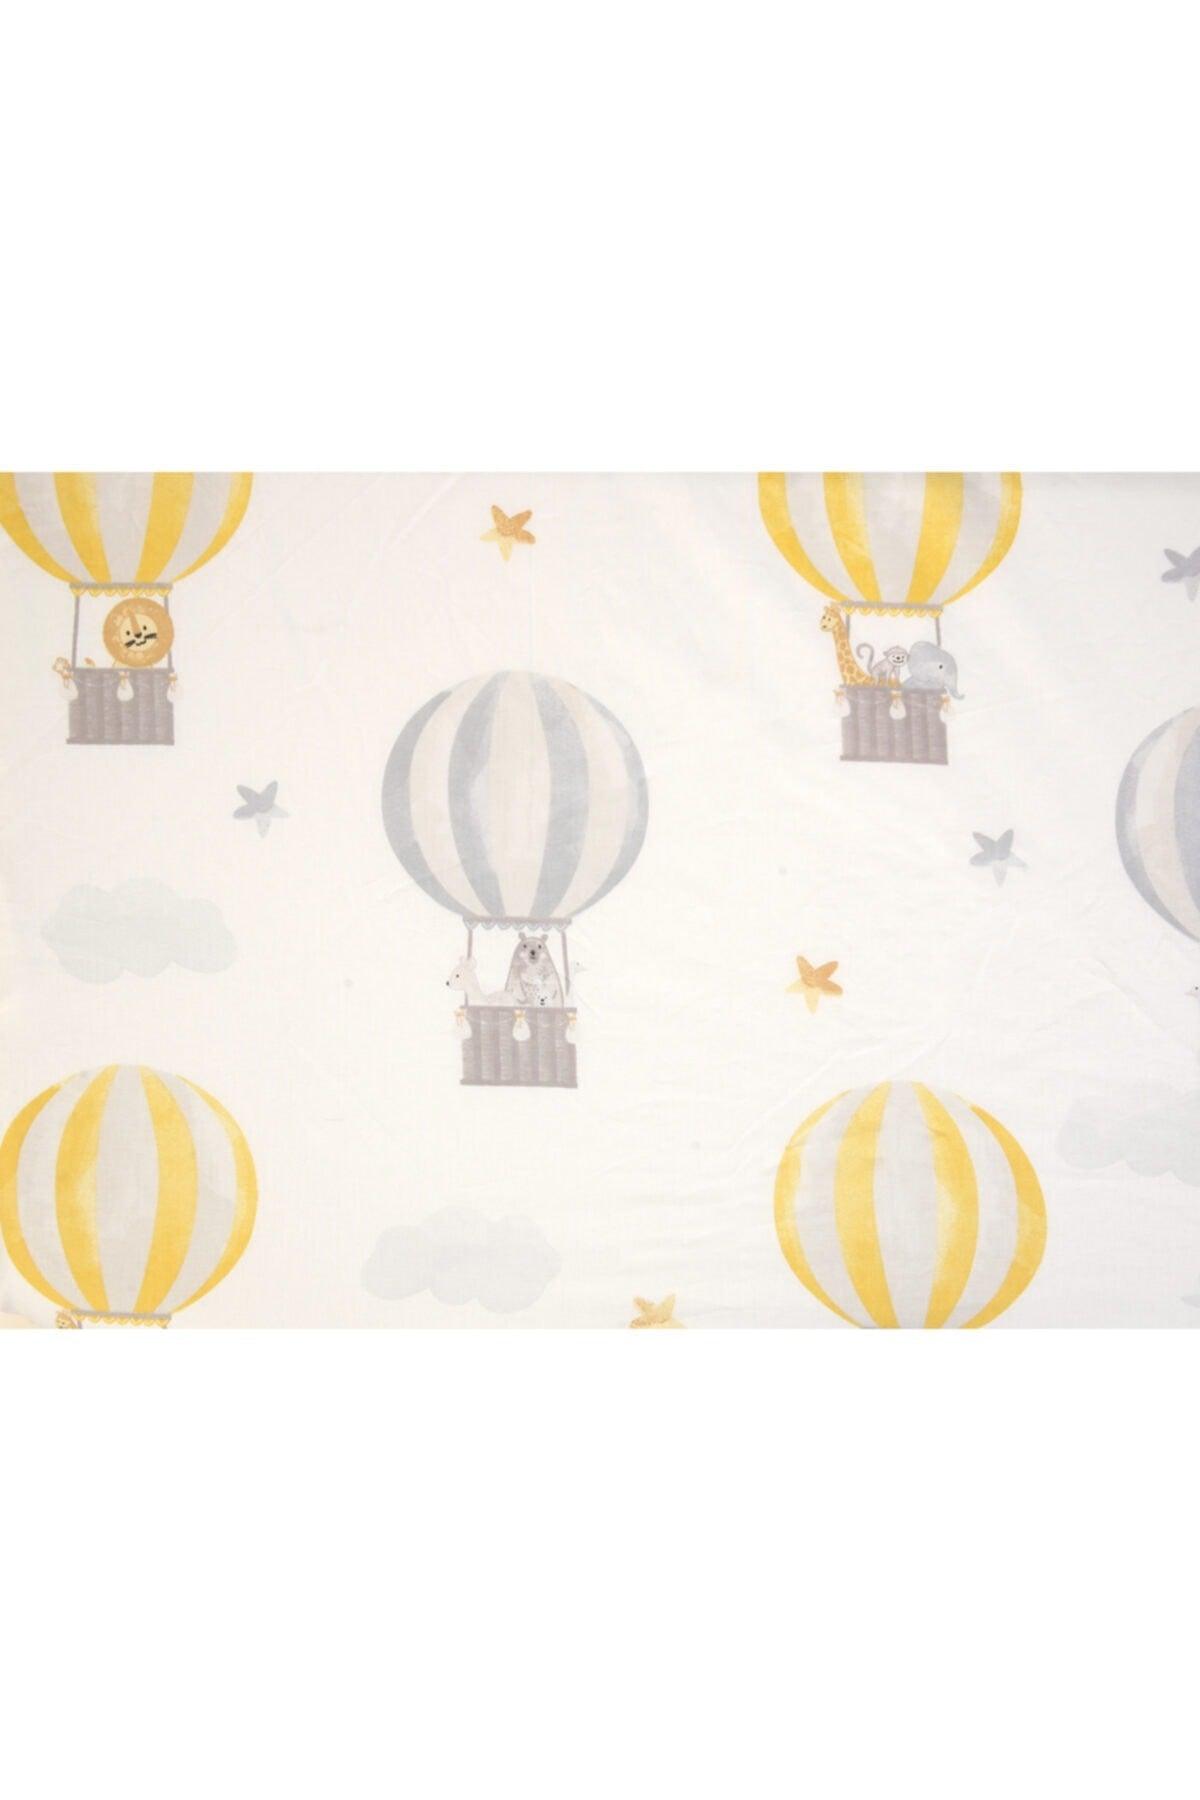 Mother's Side Crib Sheet With Elastic 2 Different Patterns Balloons And Forest Animals 60x90 +12 Cm. Set of 2 - Swordslife